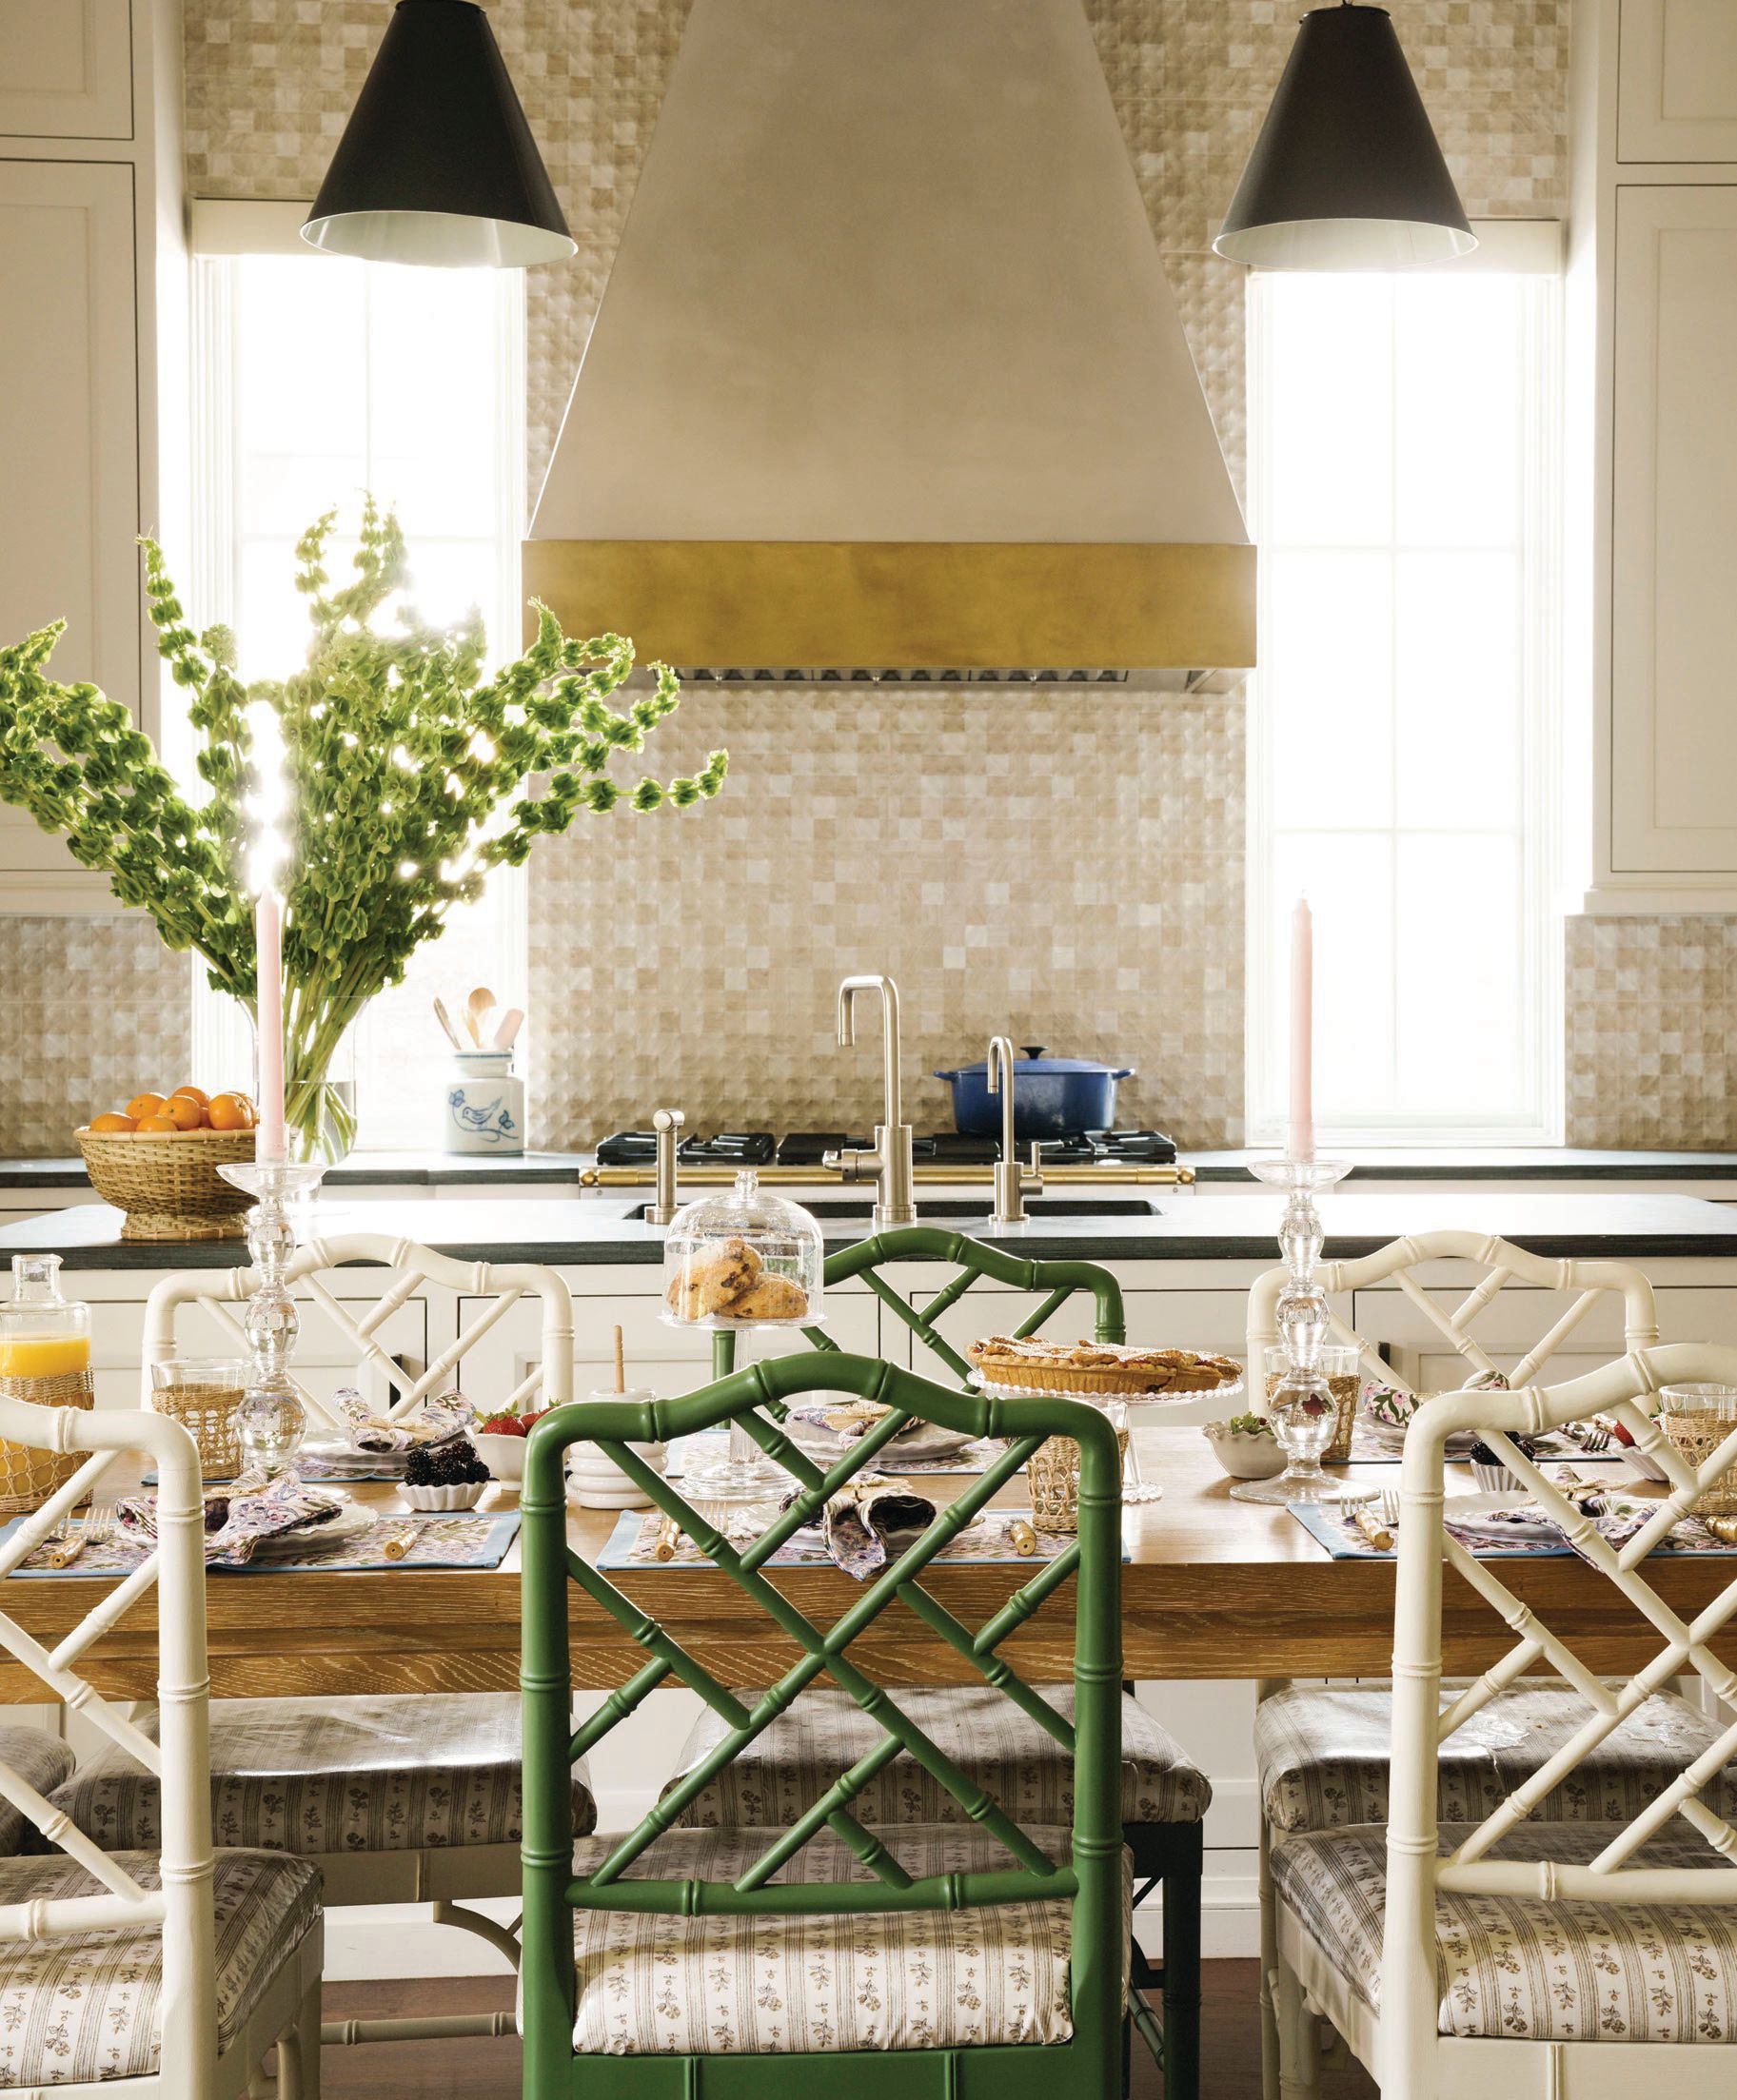 The kitchen touts a colorful mix of patterns, bold textiles and fancy fixtures. PHOTOGRAPHED BY JACK THOMPSON